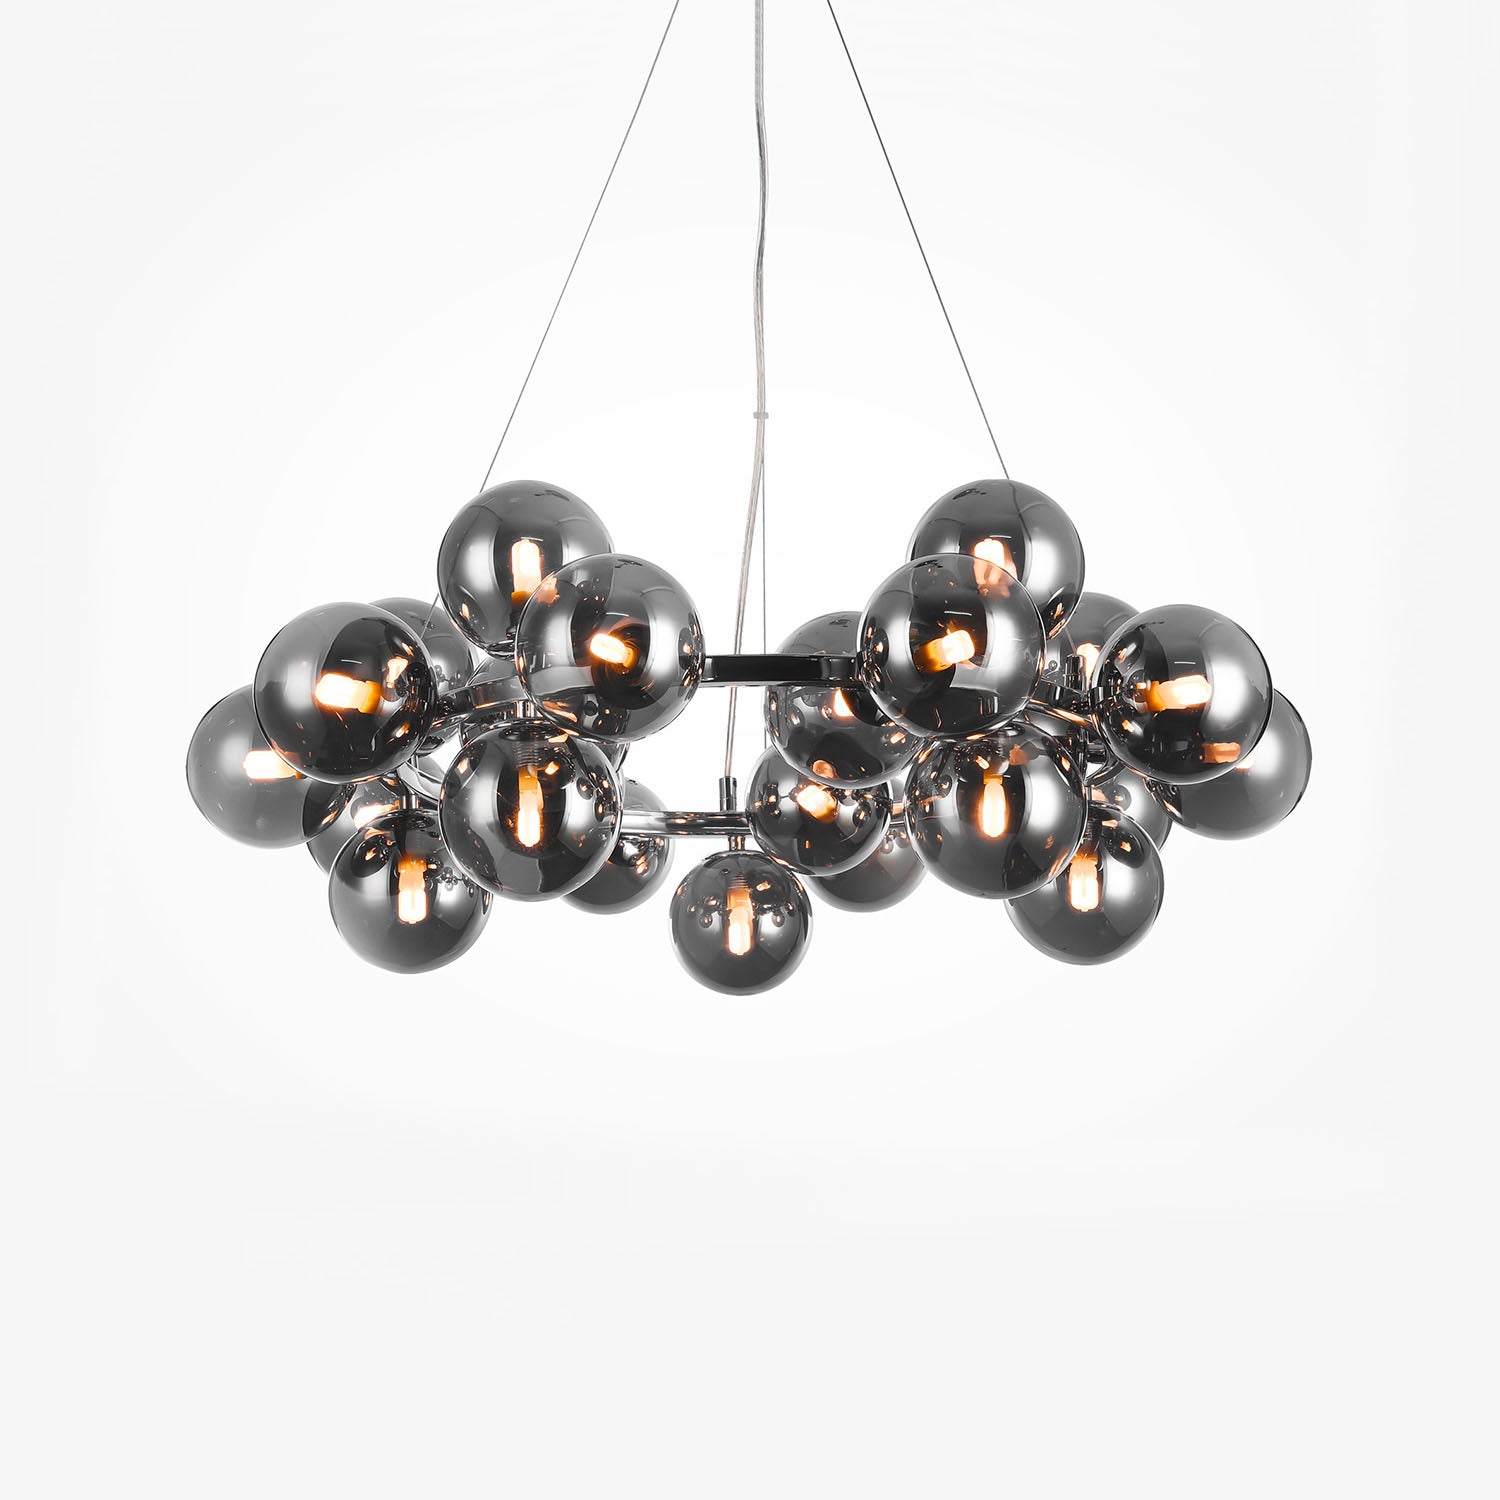 DALLAS C - Modern one-way glass chandelier for dining area